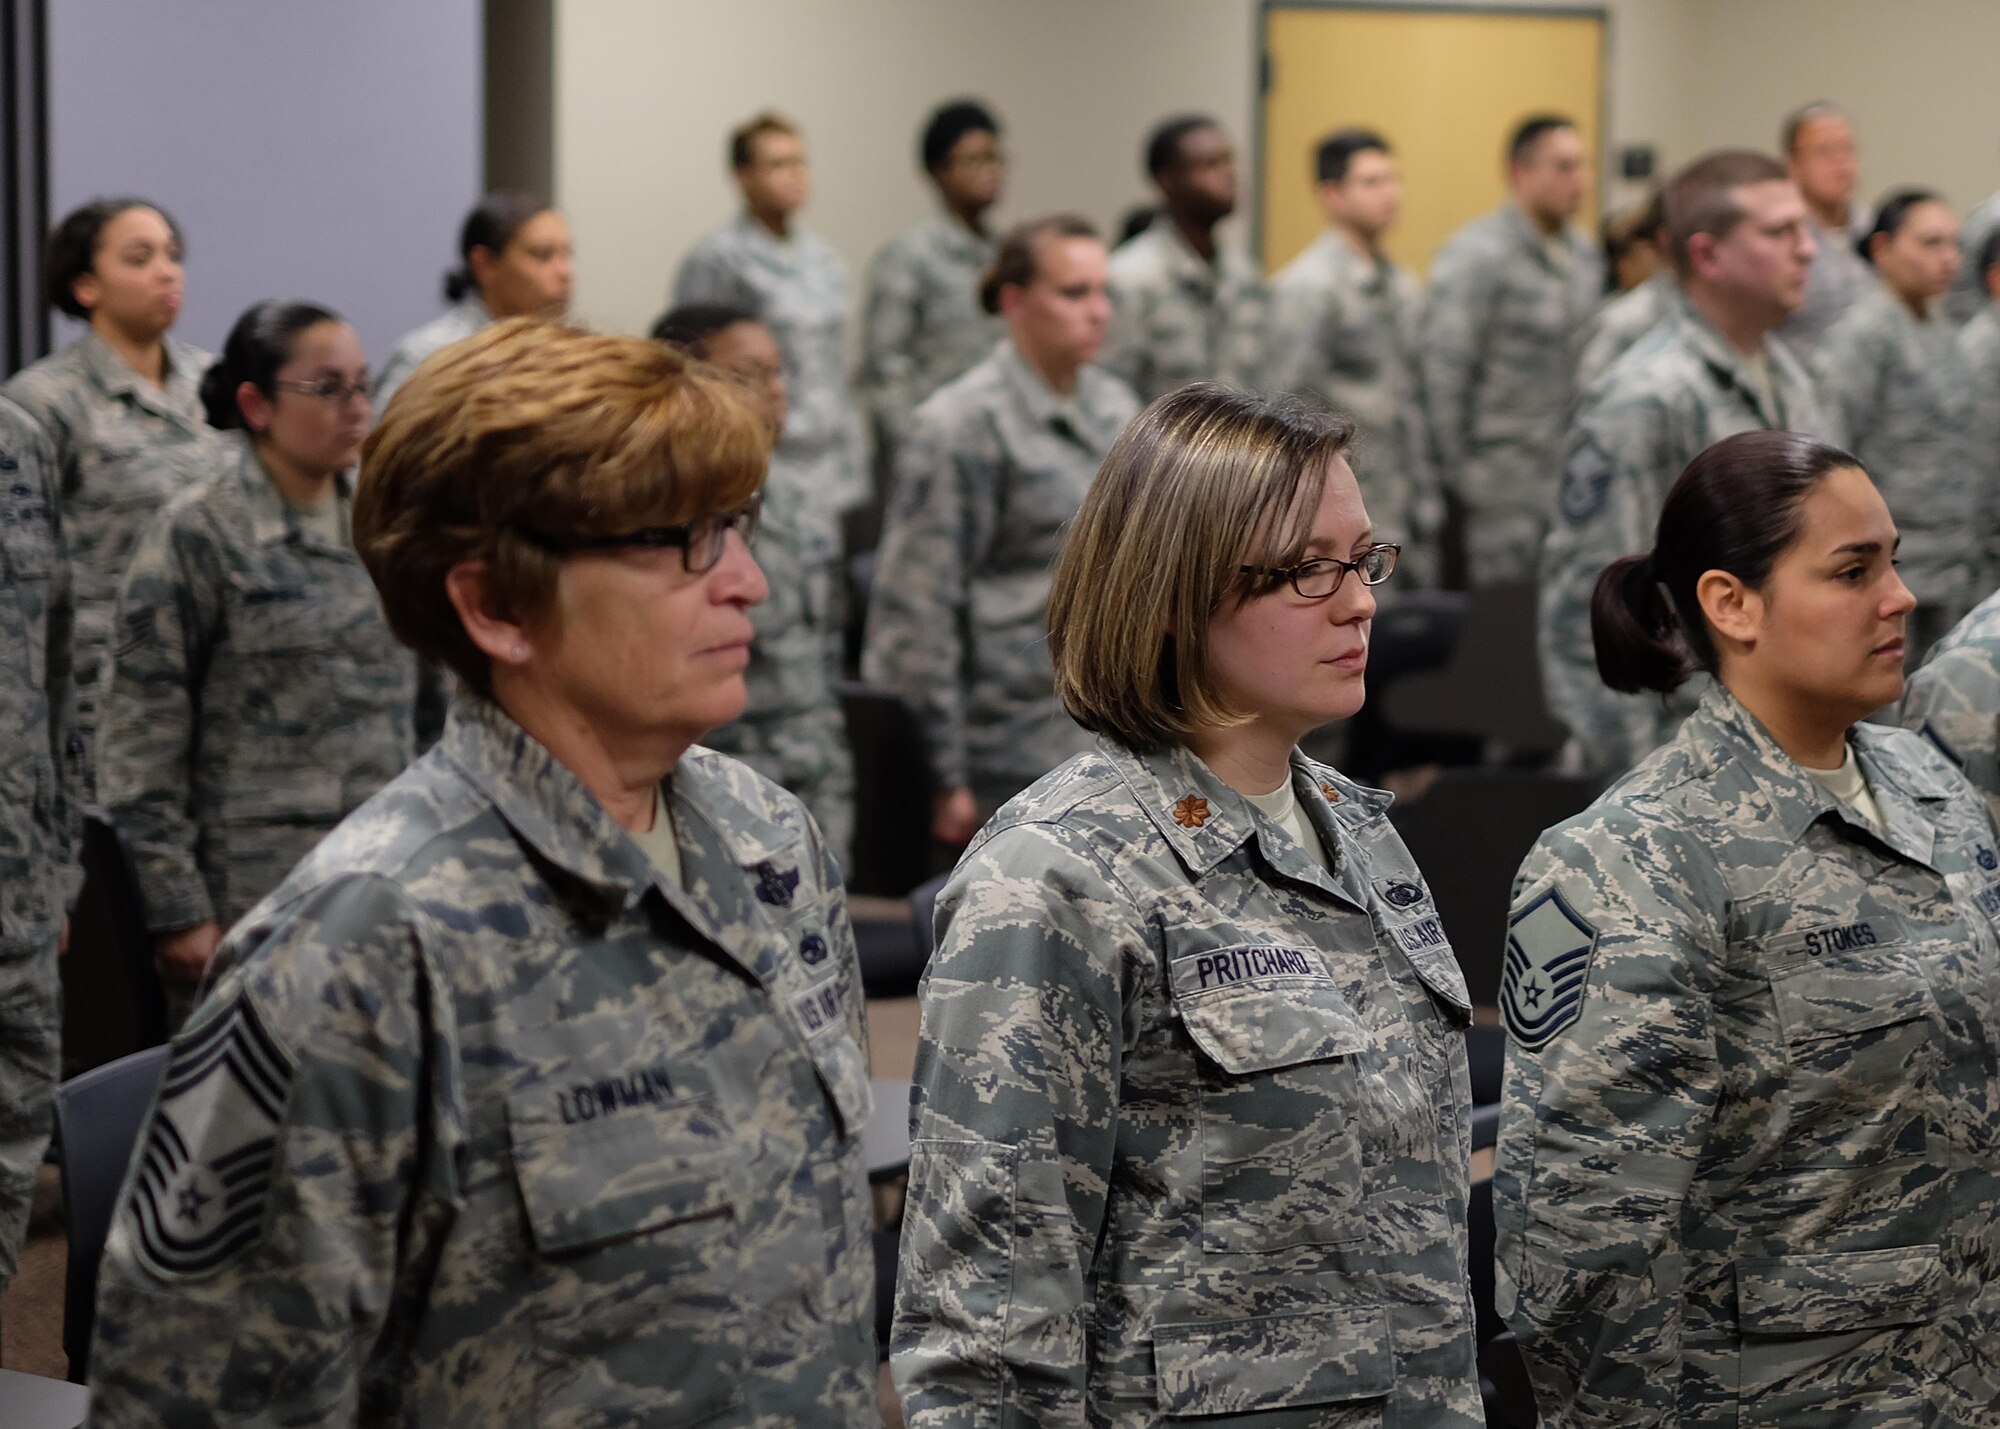 Airmen with the 931st Air Refueling Wing, stand at attention April 2, 2016, at McConnell Air Force Base, Kansas. The group is comprised mostly of 931st Force Support Squadron Airmen and gathered together to celebrate the promotion of their first senior NCO since the creation of the 931 FSS services flight, signifying growth as a unit. (U.S. Air Force photo by Senior Airman Preston Webb)